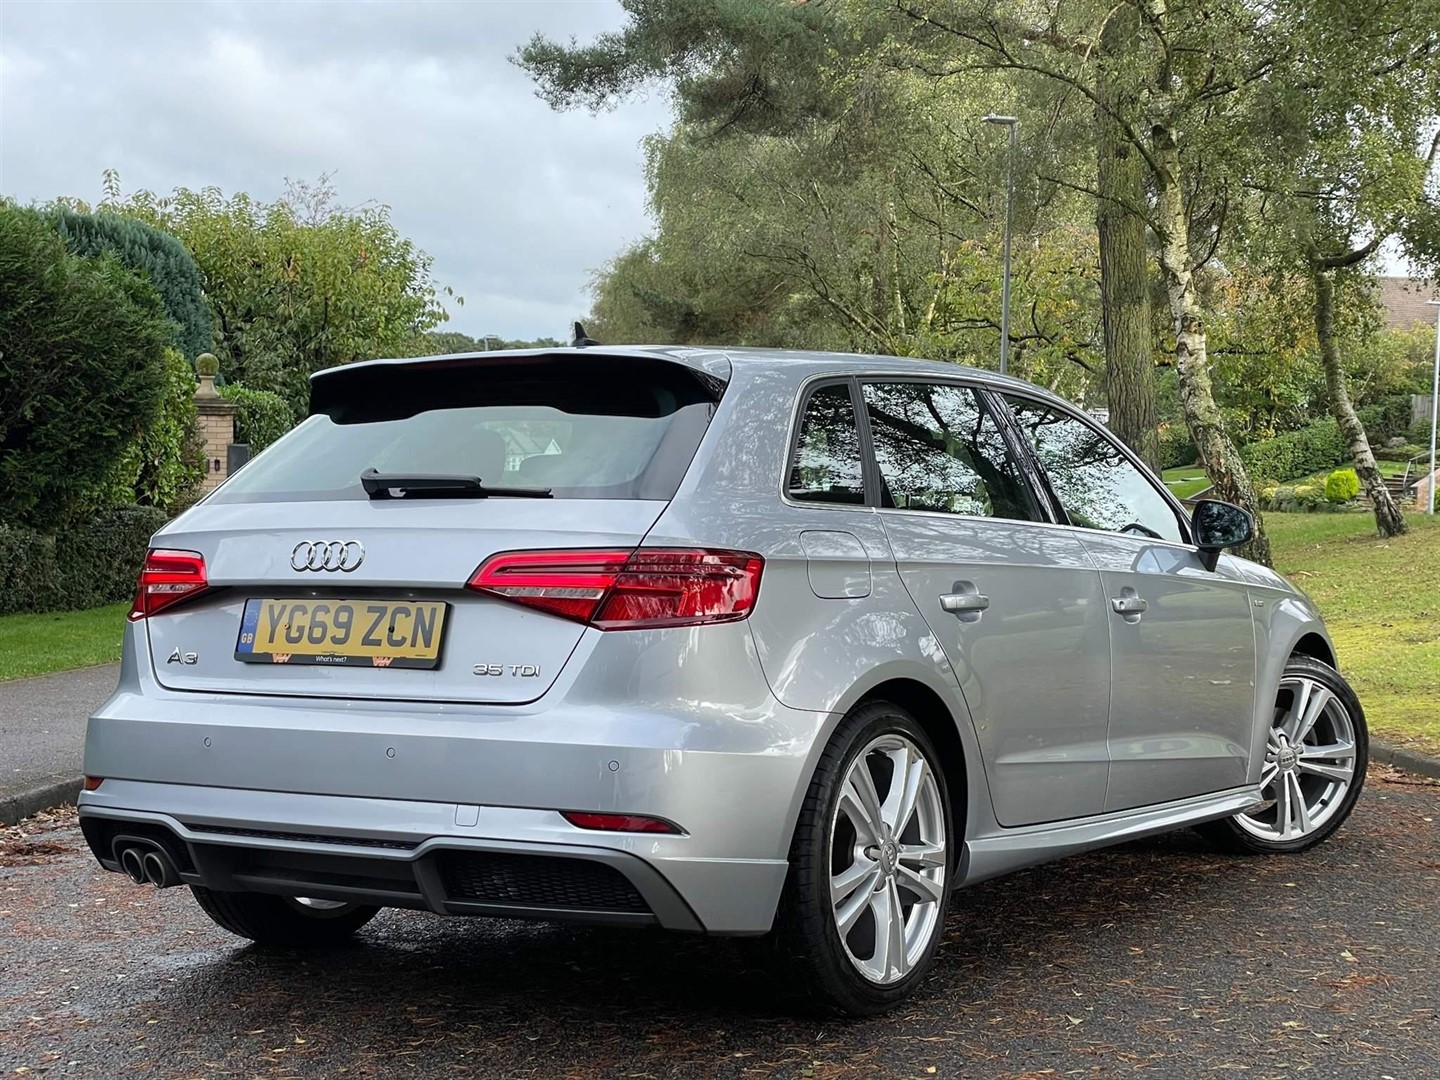 Used Audi A3 for sale in Mansfield Woodhouse, Nottinghamshire